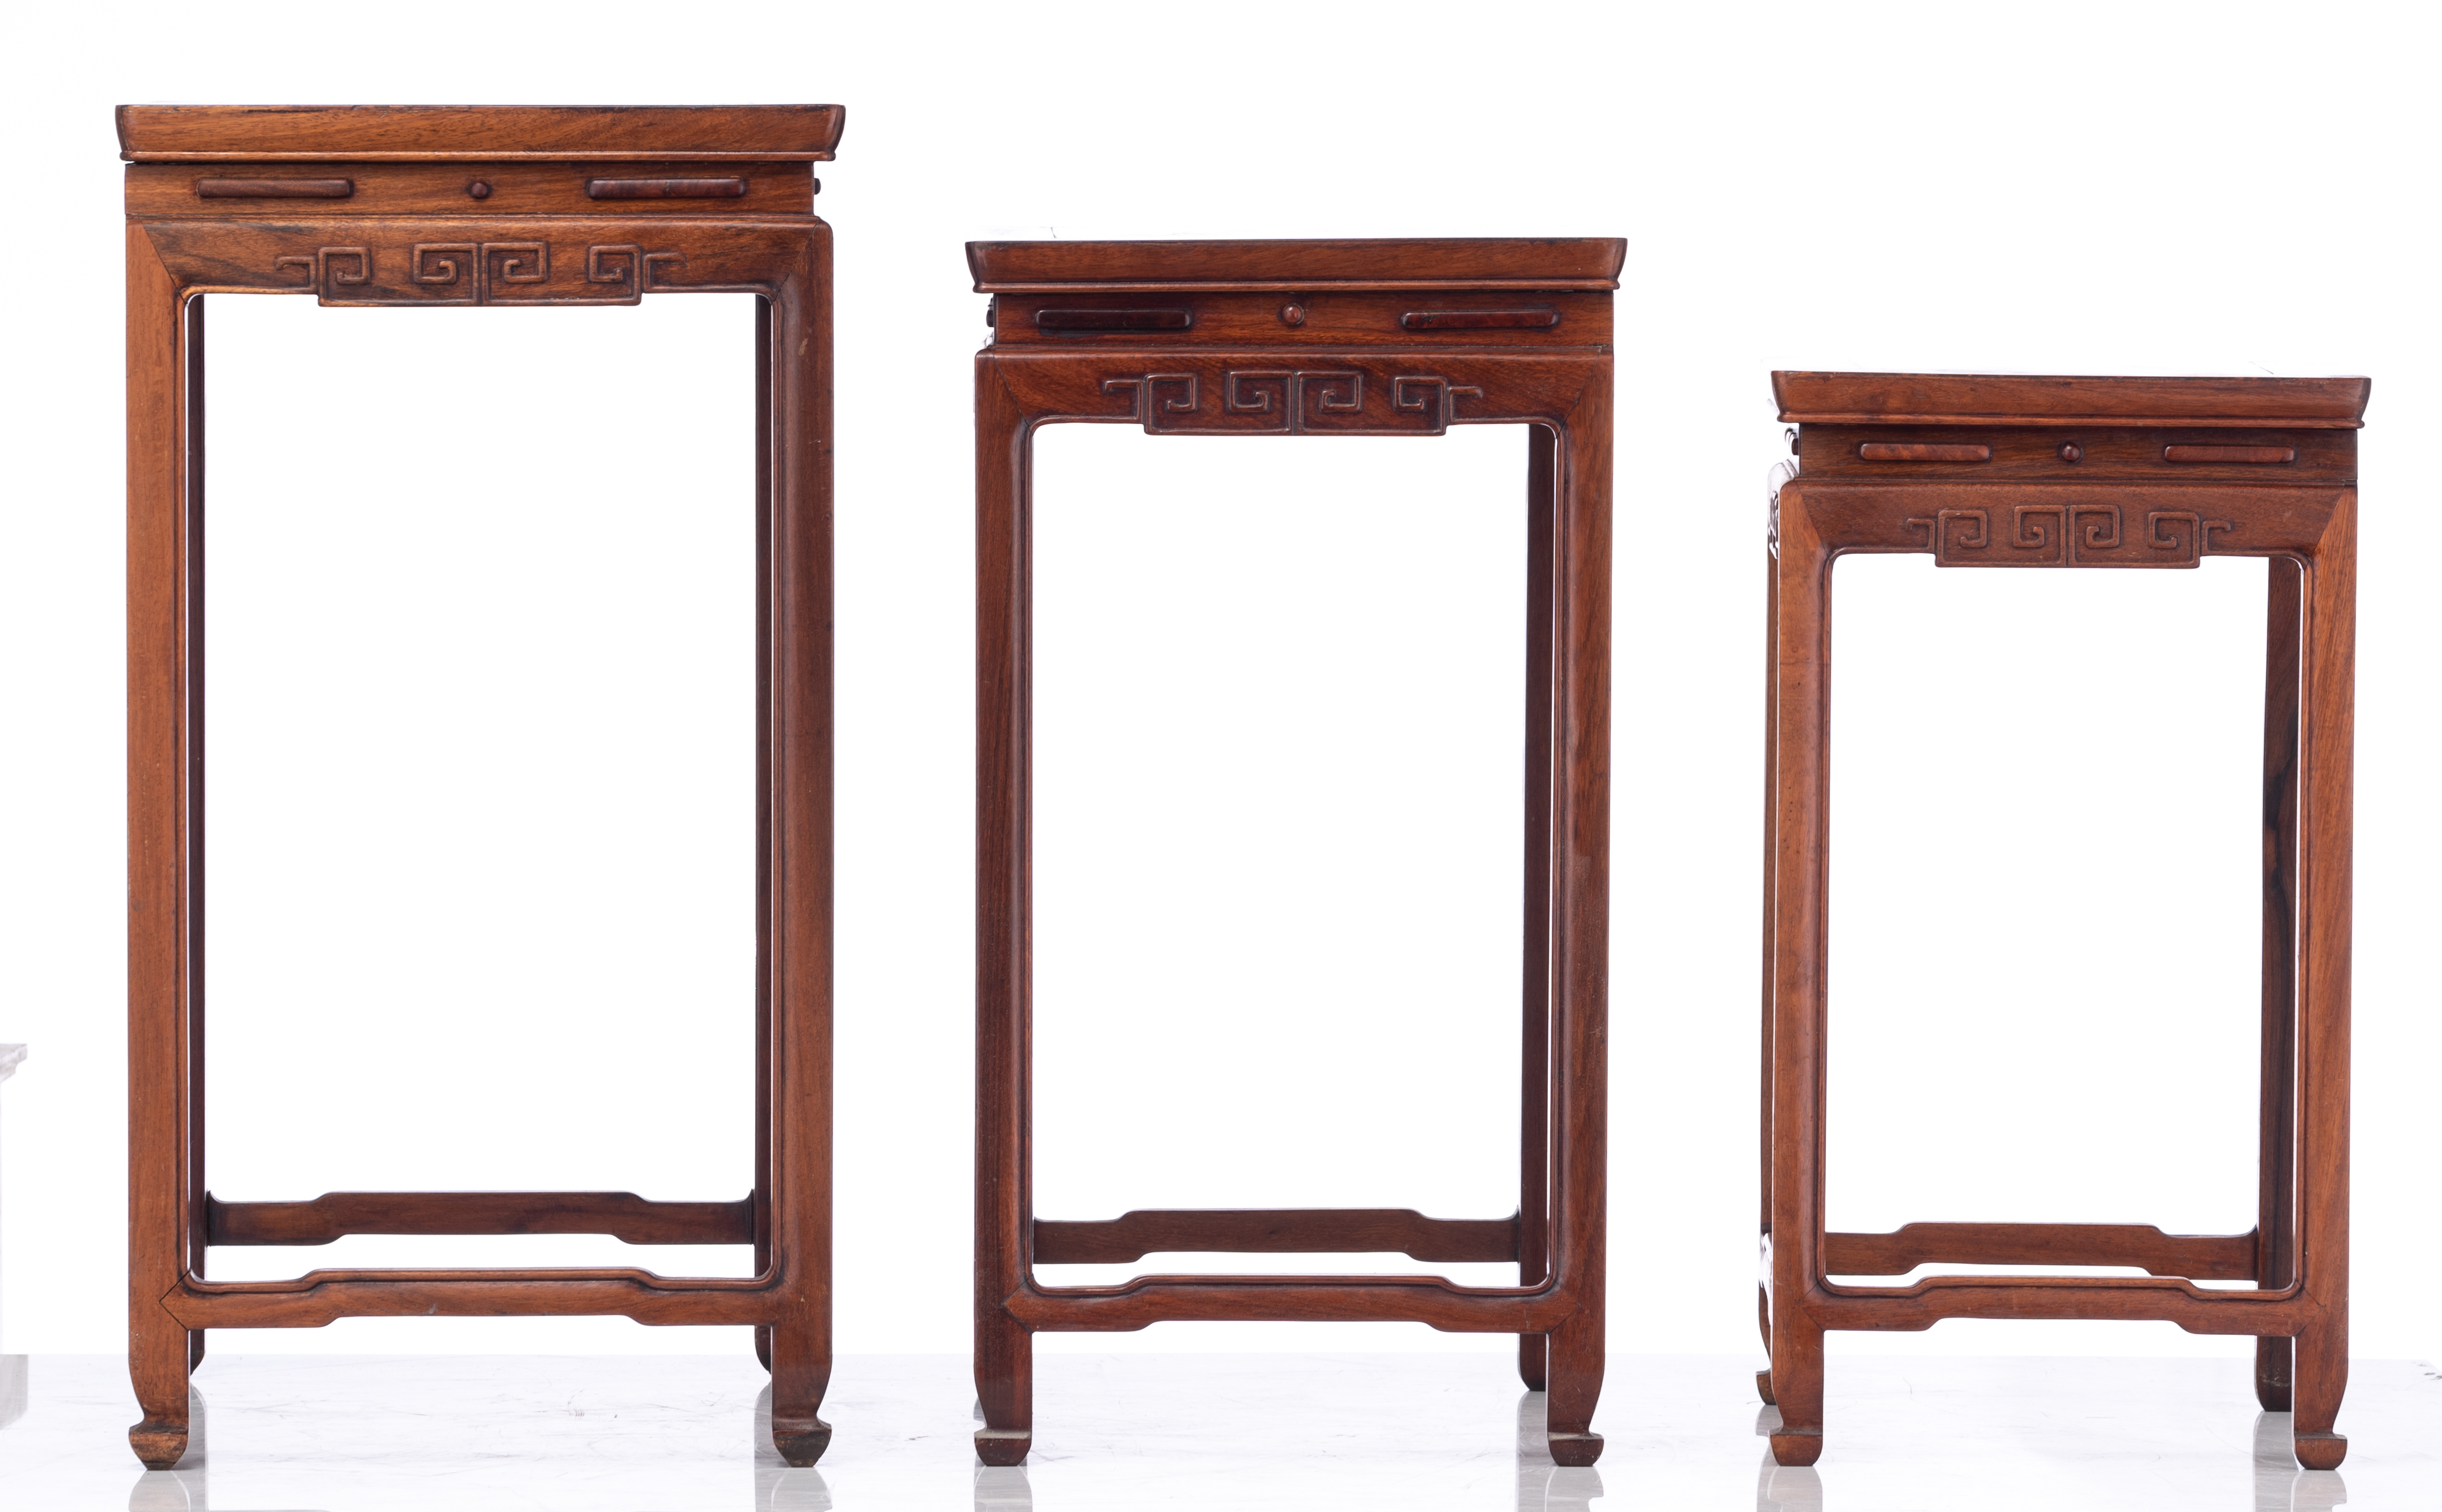 A set of three Chinese nesting tables, H 53,5 - 66,5 cm - Image 5 of 7